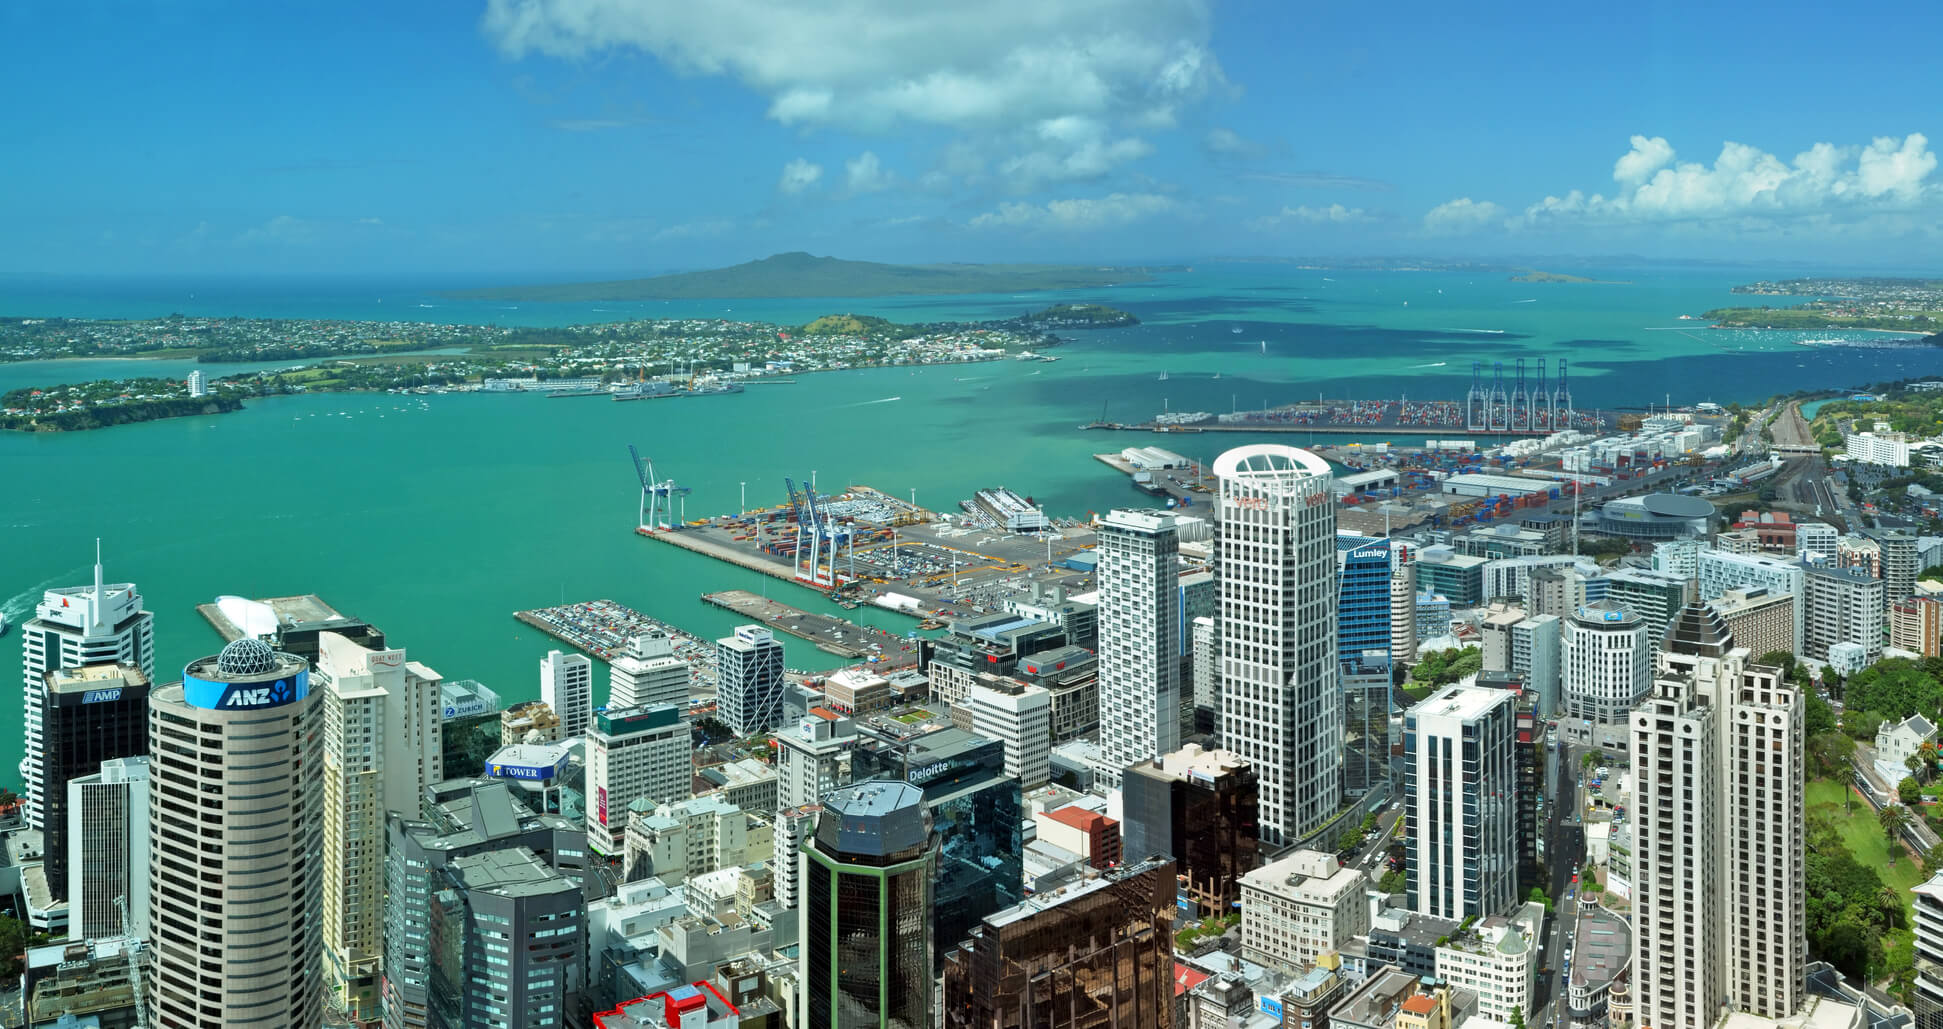 Flight deals from Budapest, Hungary to Auckland, New Zealand | Secret Flying